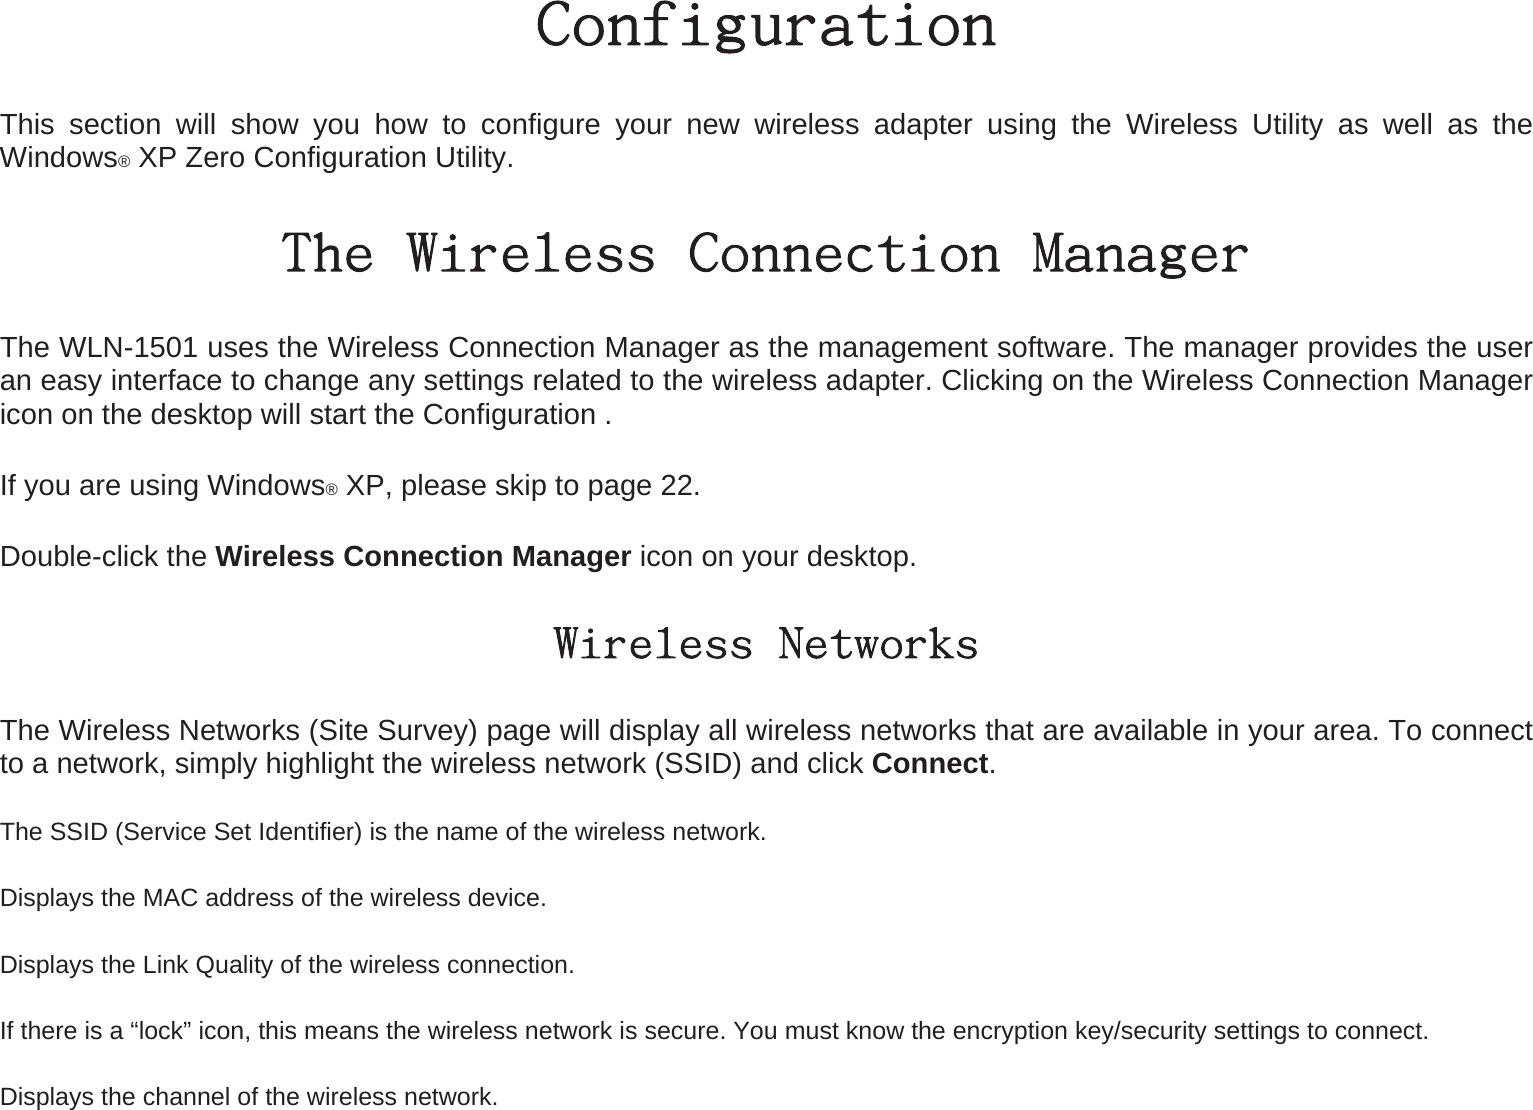 Configuration This section will show you how to configure your new wireless adapter using the Wireless Utility as well as the Windows® XP Zero Configuration Utility. The Wireless Connection Manager The WLN-1501 uses the Wireless Connection Manager as the management software. The manager provides the user an easy interface to change any settings related to the wireless adapter. Clicking on the Wireless Connection Manager icon on the desktop will start the Configuration . If you are using Windows® XP, please skip to page 22. Double-click the Wireless Connection Manager icon on your desktop. Wireless Networks The Wireless Networks (Site Survey) page will display all wireless networks that are available in your area. To connect to a network, simply highlight the wireless network (SSID) and click Connect. The SSID (Service Set Identifier) is the name of the wireless network. Displays the MAC address of the wireless device. Displays the Link Quality of the wireless connection.   If there is a “lock” icon, this means the wireless network is secure. You must know the encryption key/security settings to connect. Displays the channel of the wireless network. 